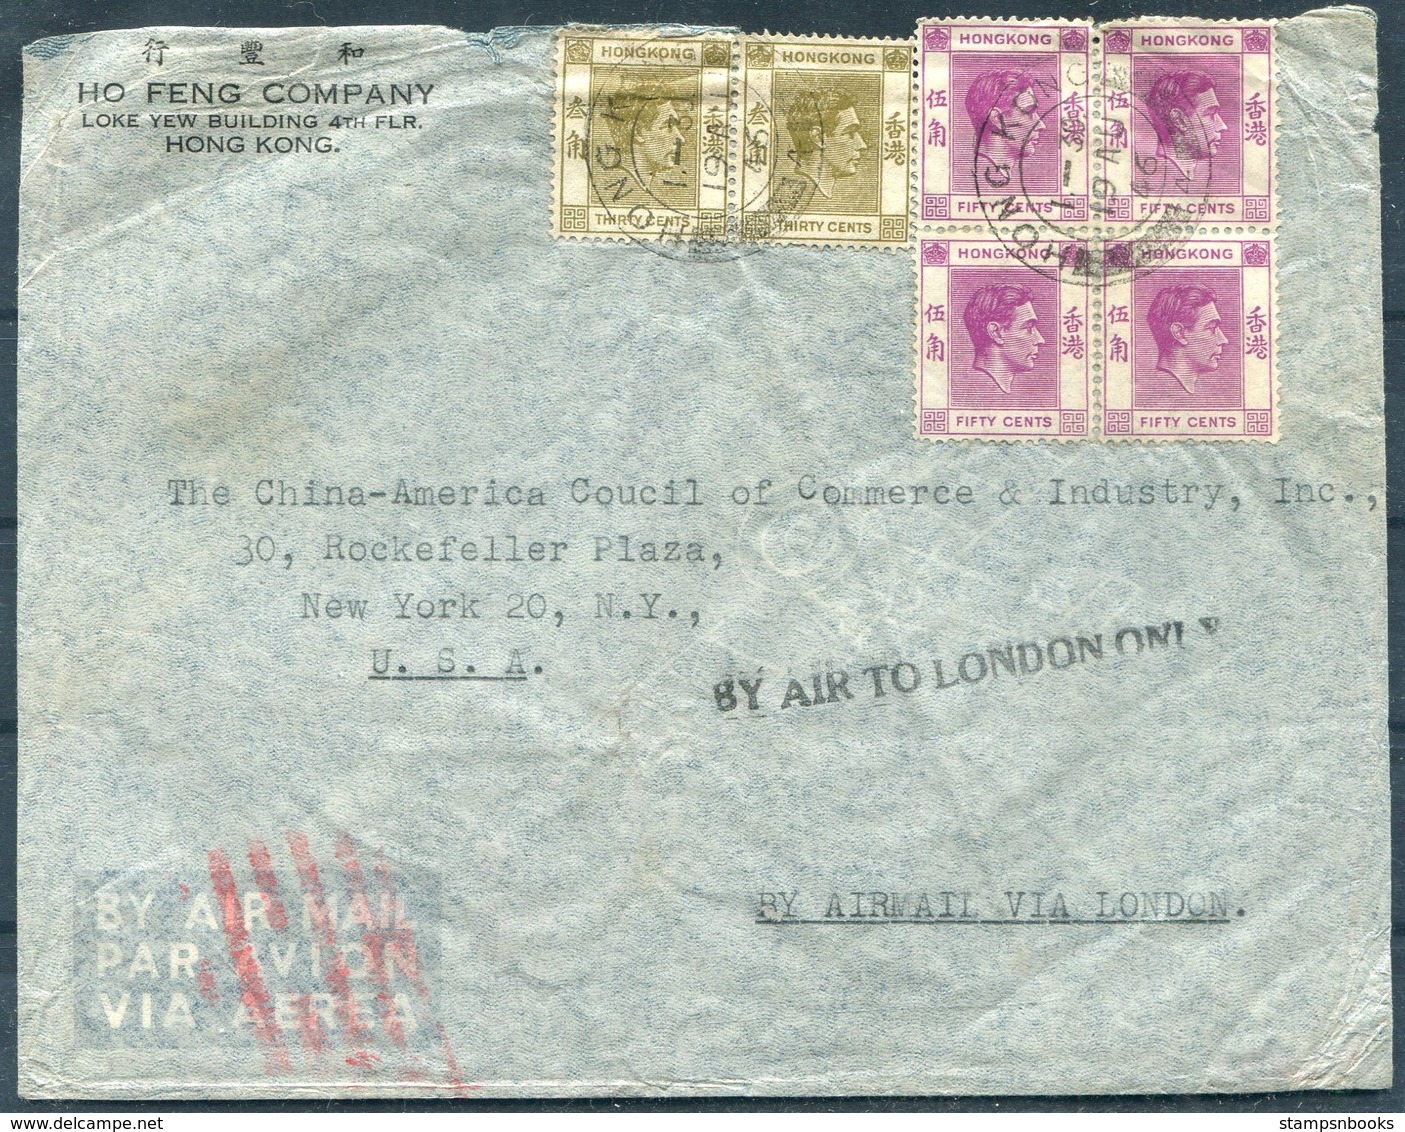 1946 Hong Kong $2.60 Rate Airmail Cover - The China America Council Of Commerce, New York USA. "BY AIR TO LONDON ONLY" - Lettres & Documents